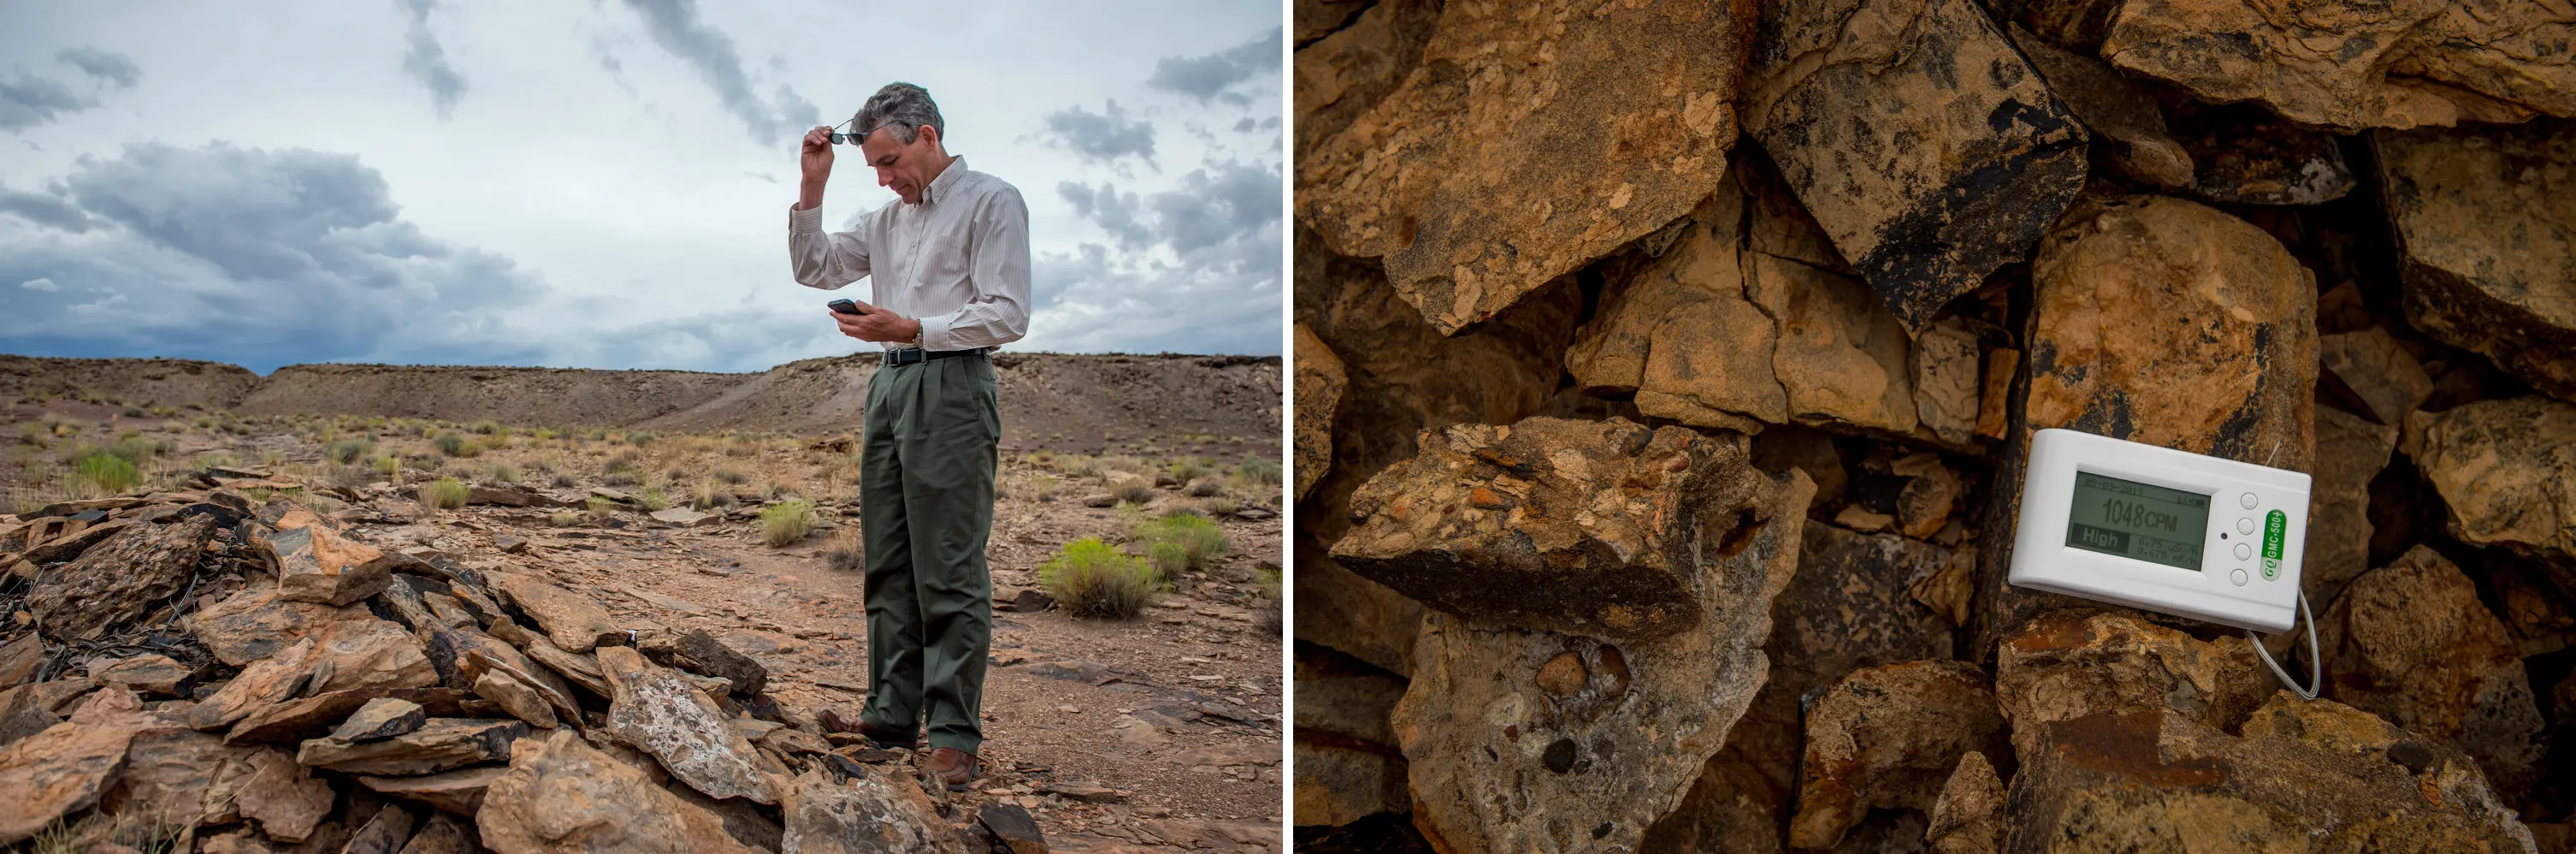 Dr. Frank Dalichow brings his Geiger counter to detect radiation in the surrounding soil and rock when he goes for walks near Tuba City. Images by Mary F. Calvert. United States, 2020.